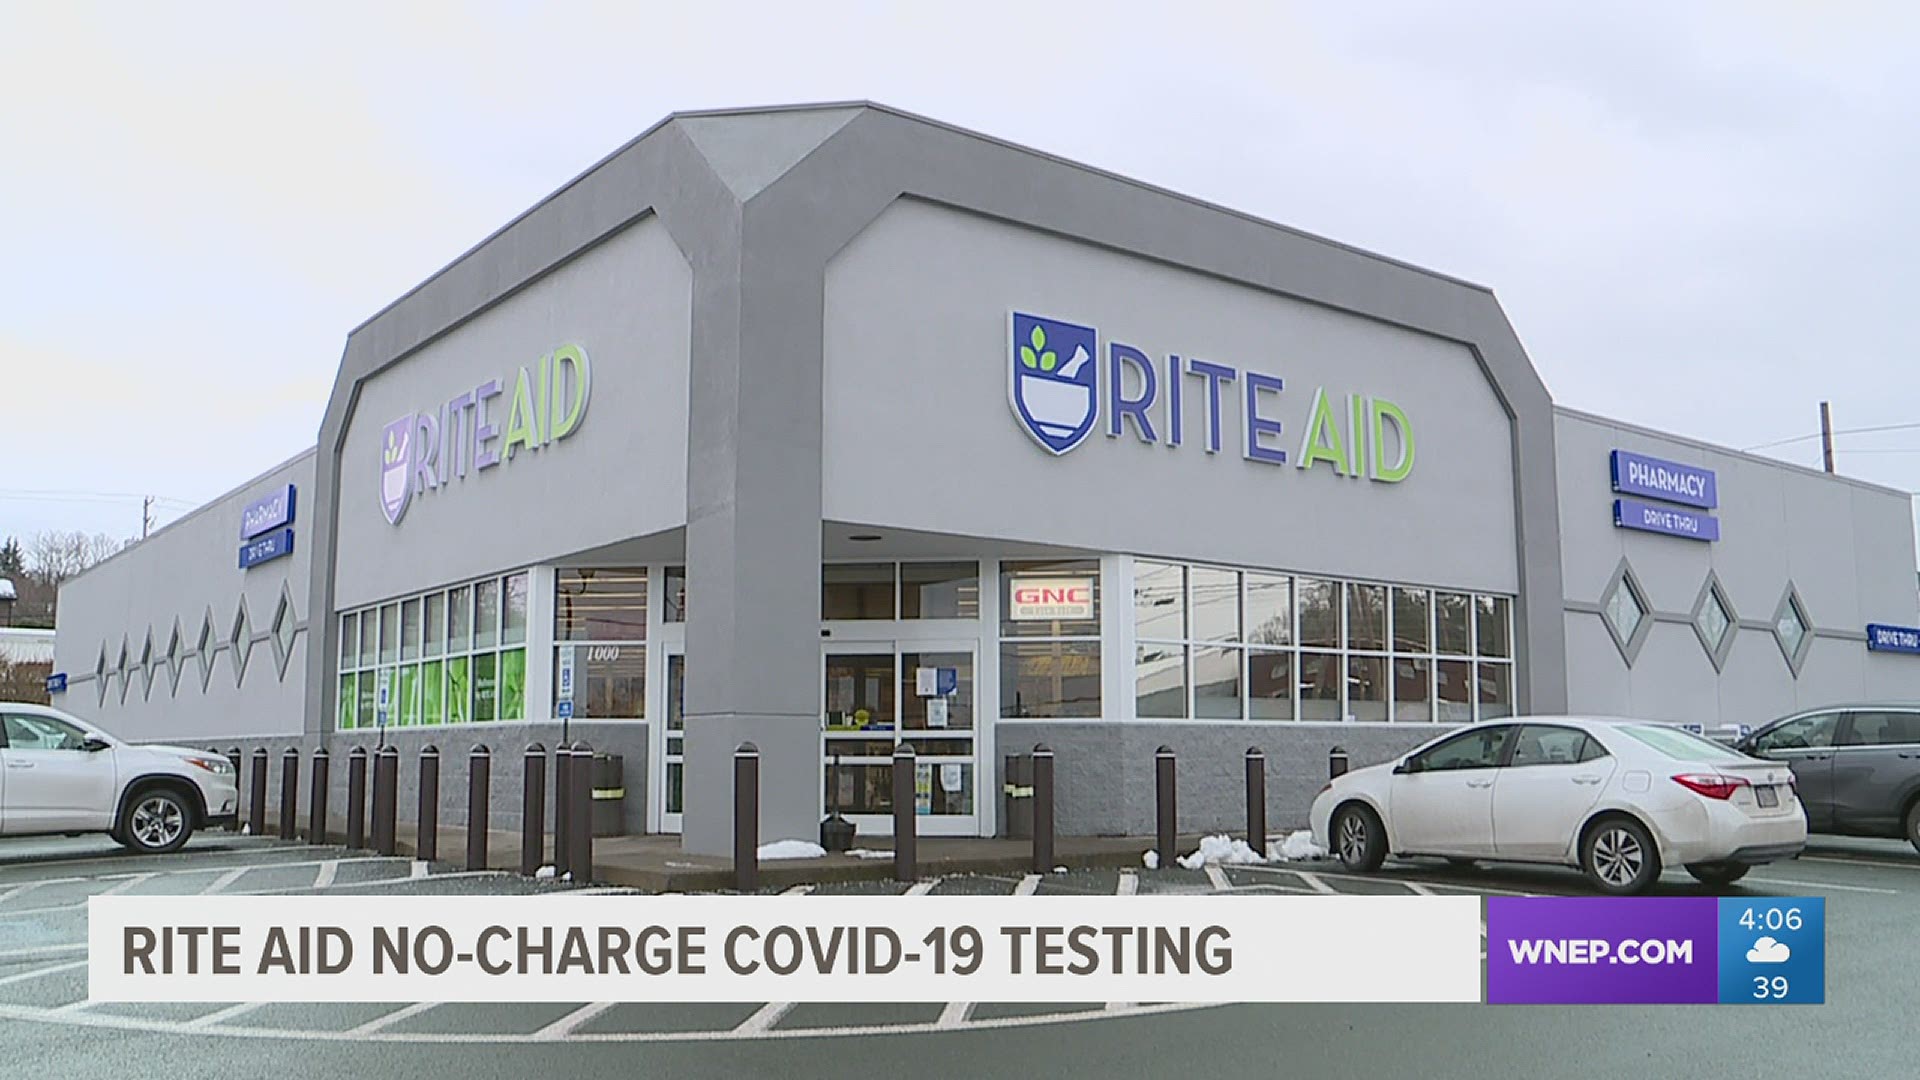 How Do I Get A Covid Test At Rite Aid